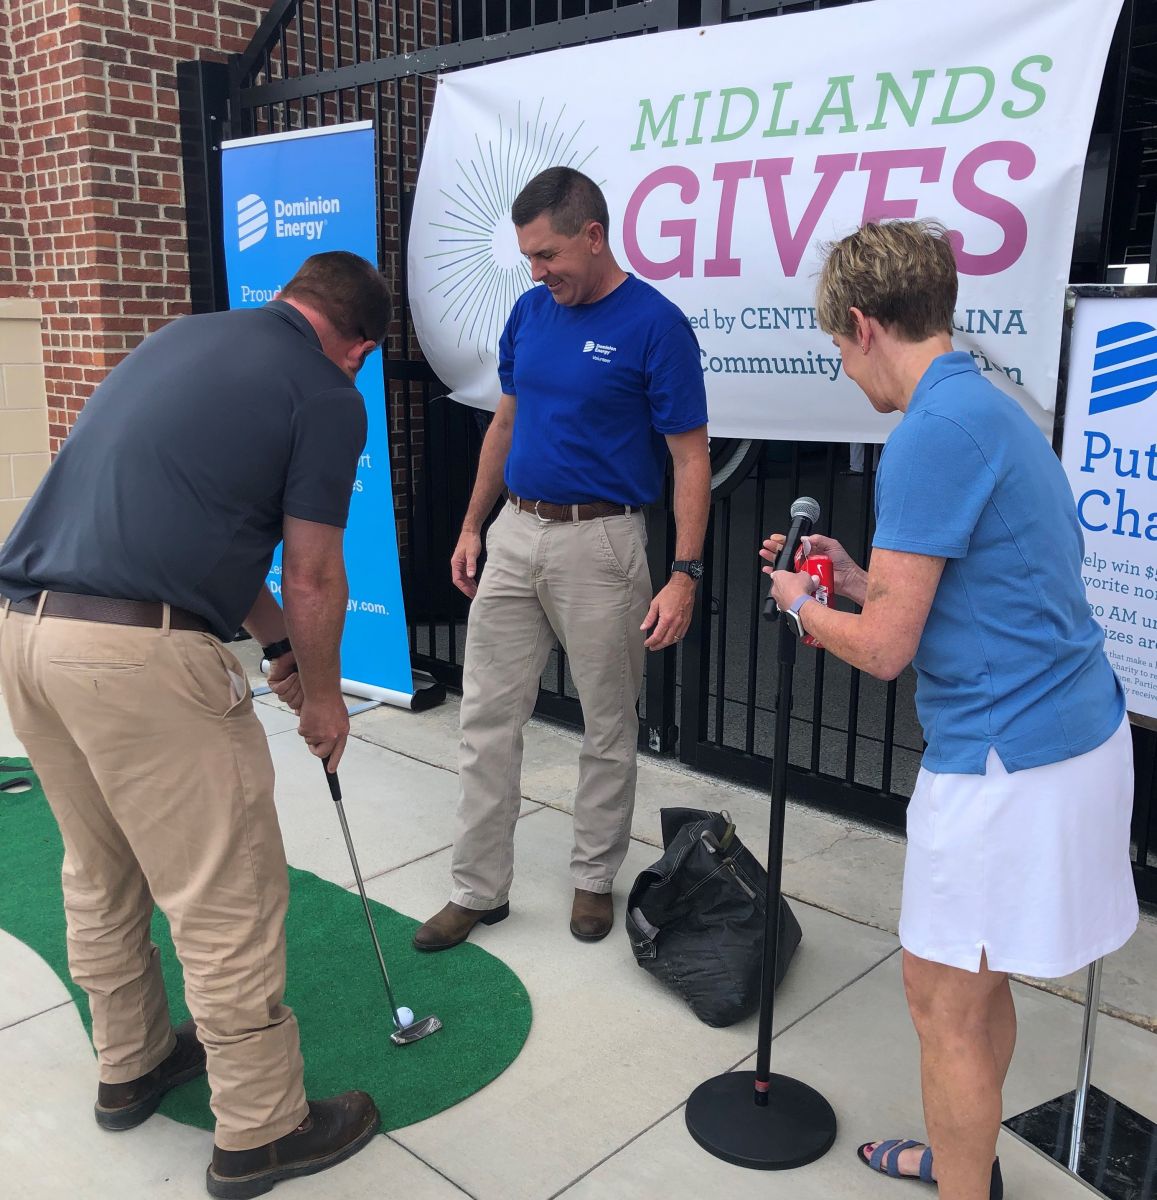 Participants test their skills in the Dominion Energy putting challenge during the 2019 Midlands Gives event at Segra Park. (Photo/Provided)